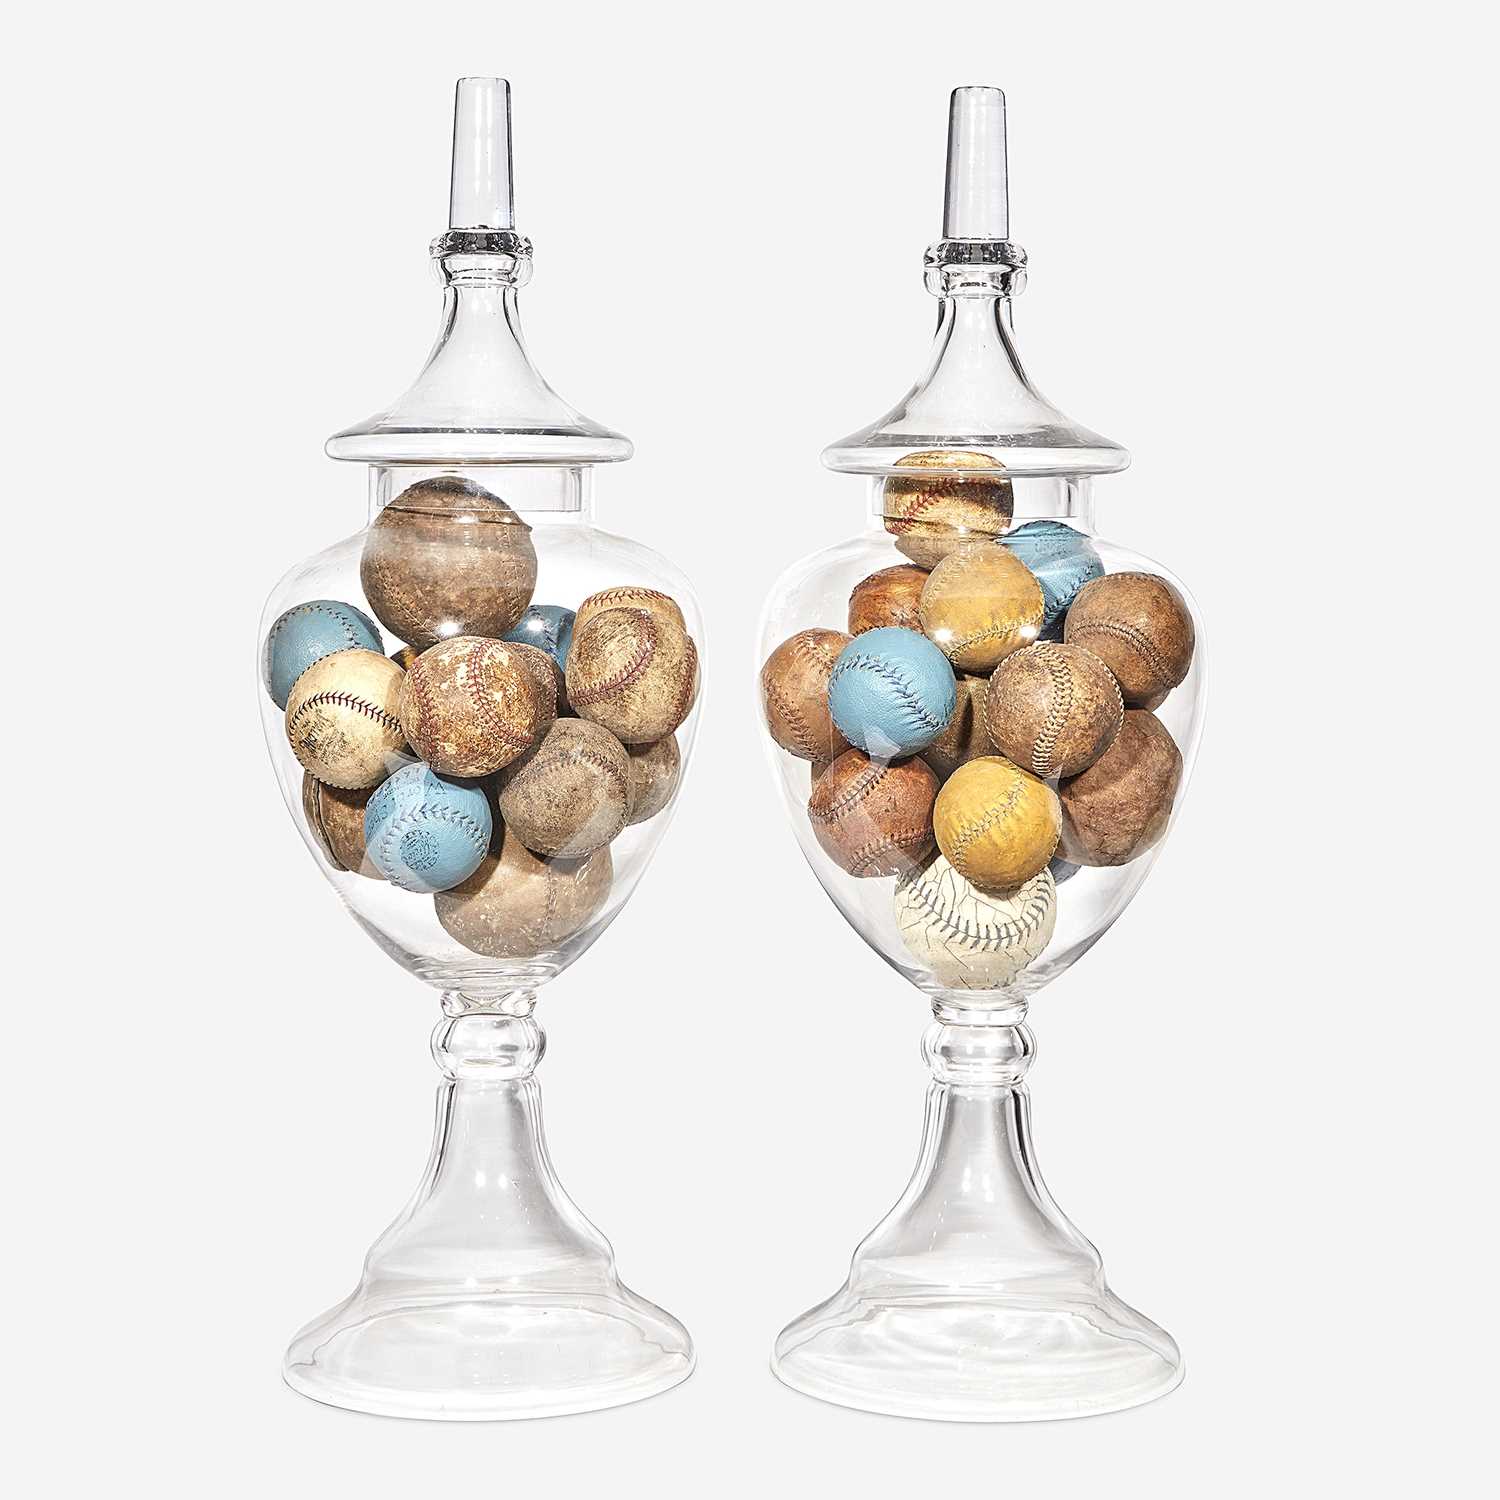 Lot 251 - Two uncolored glass apothecary jars filled with baseballs